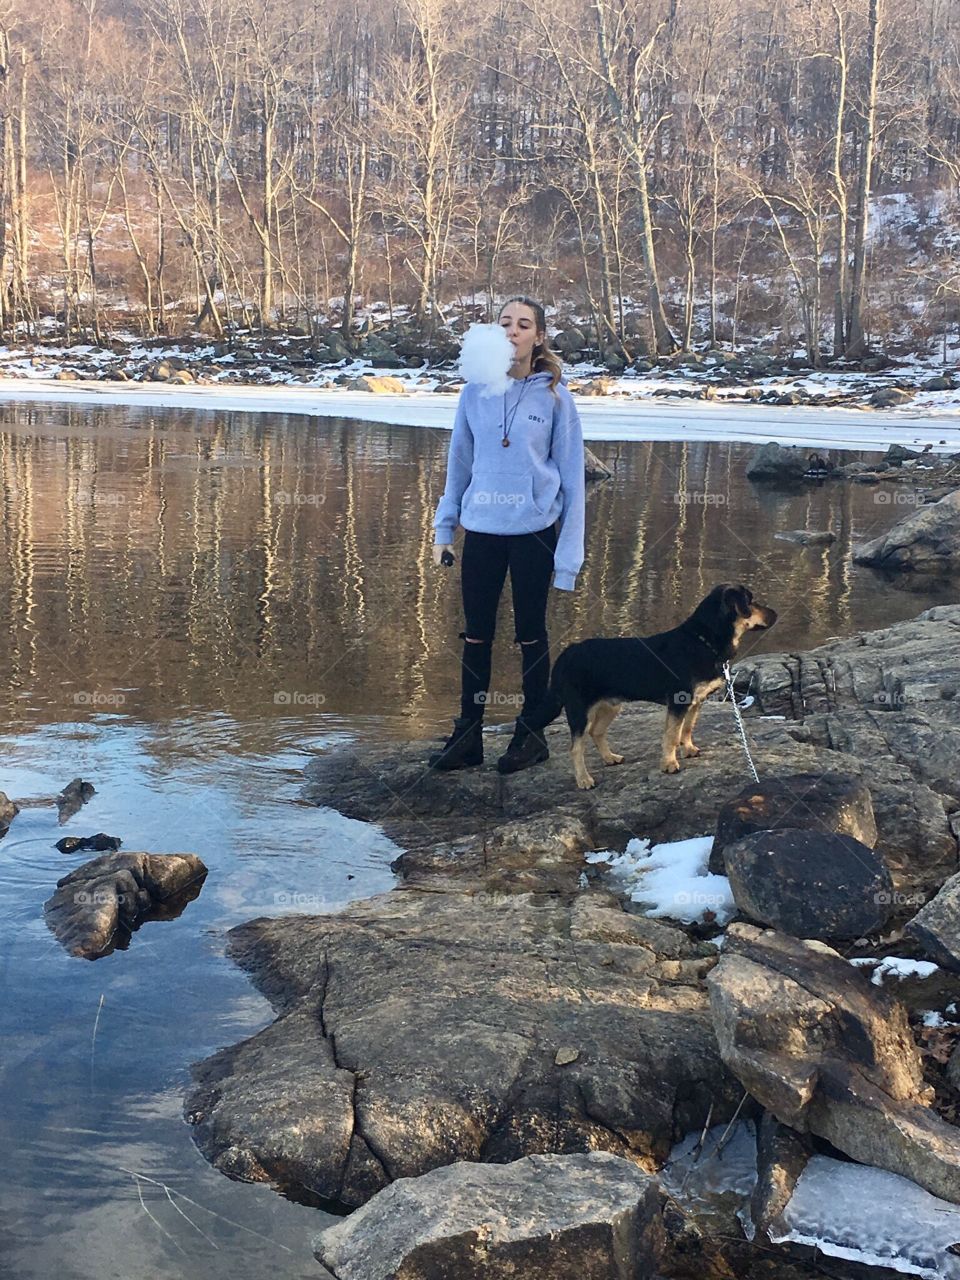 Vaping on an icy hike with the puppy